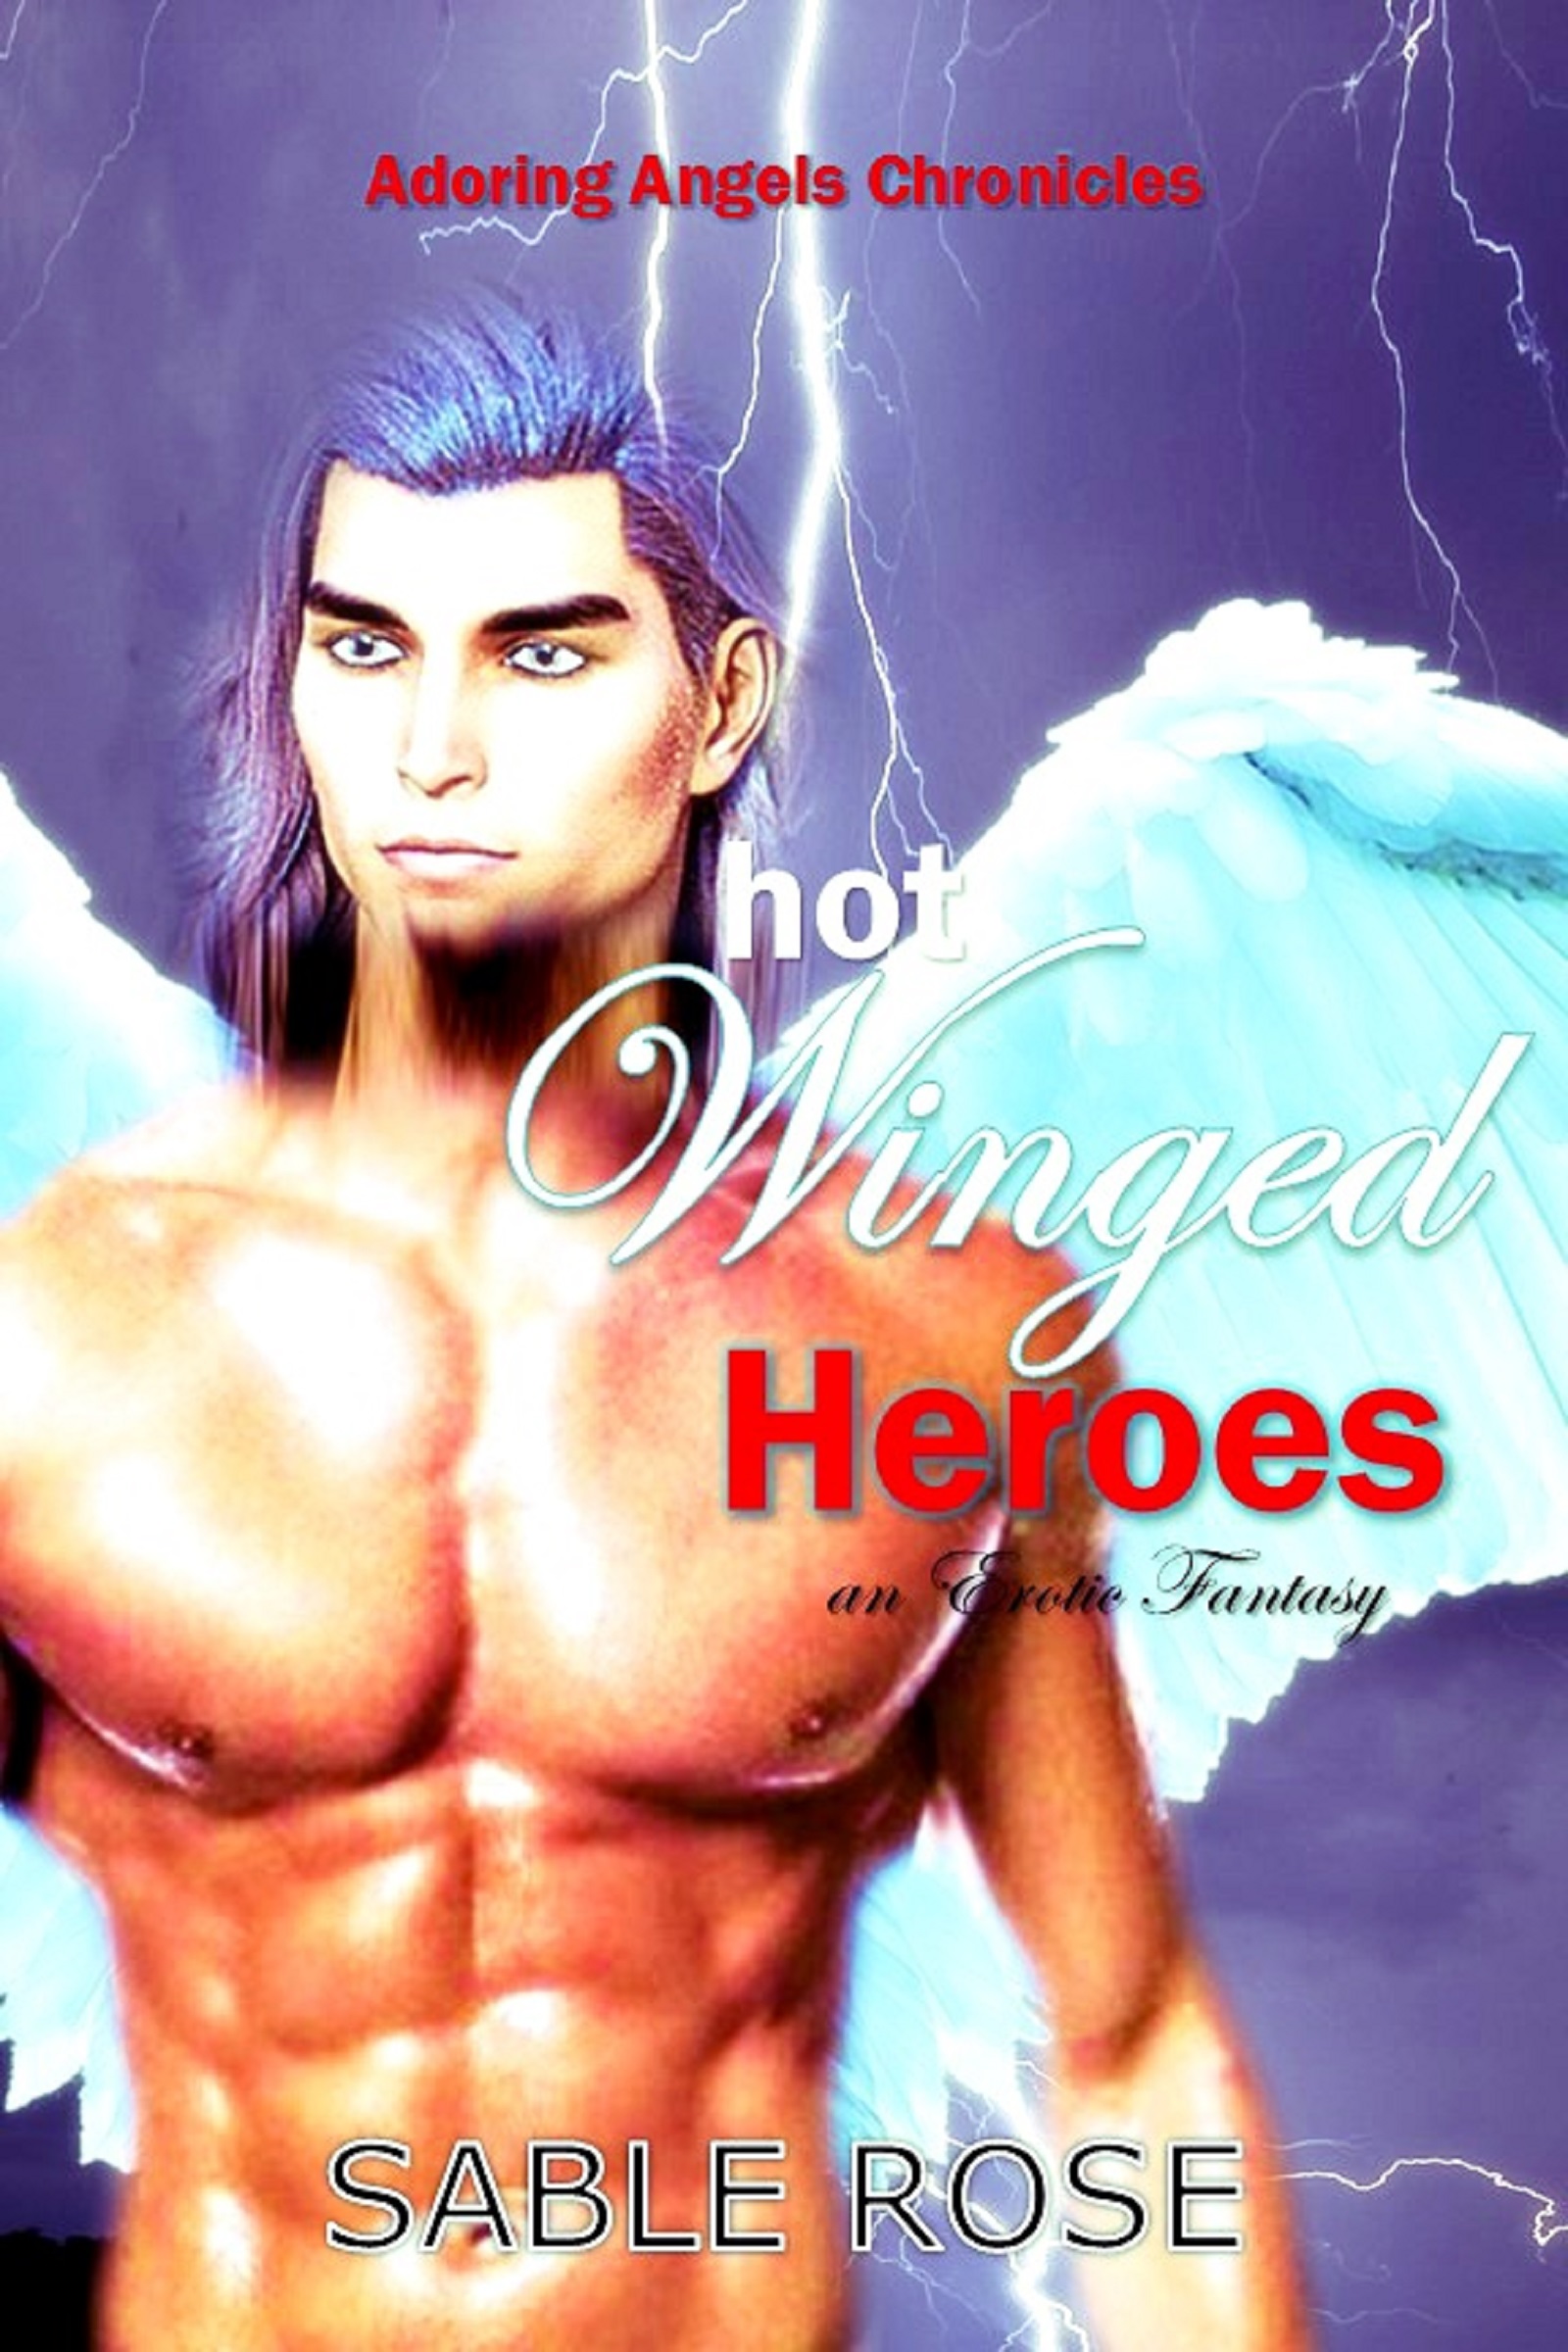 FREE: Hot Winged Heroes by Sable Rose